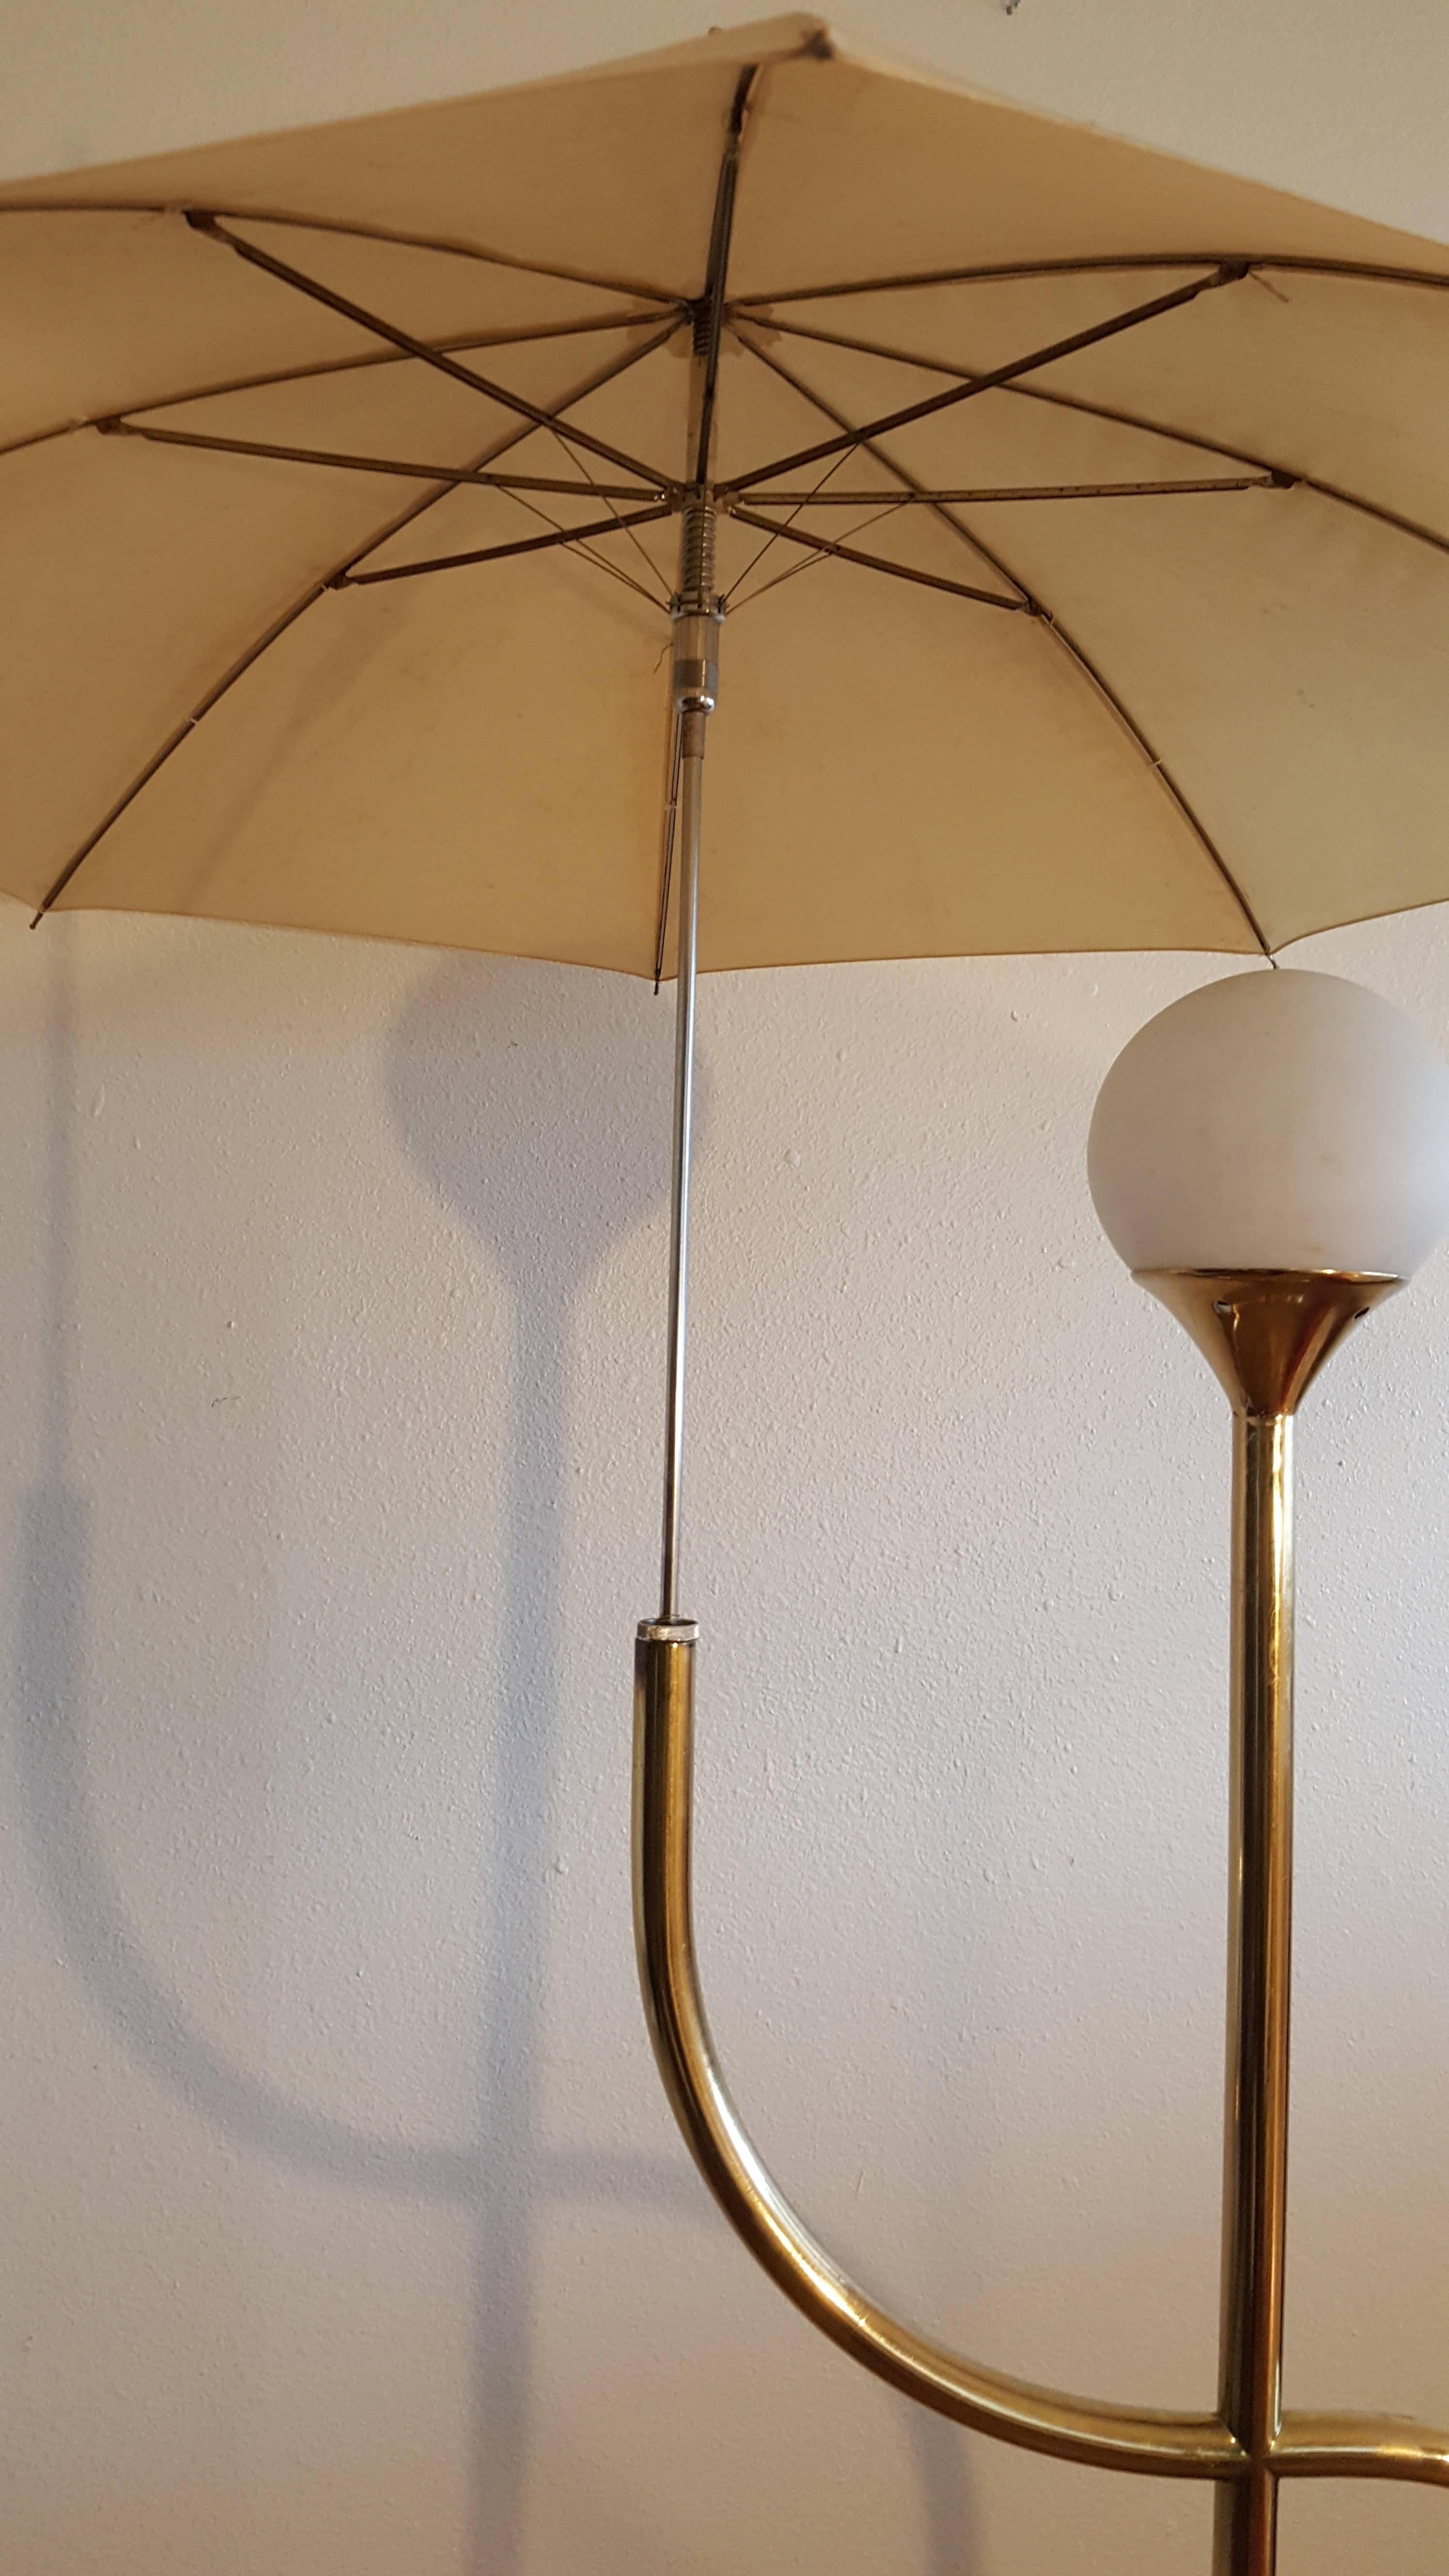 Adorable brass accent piece. Fully working umbrella is the focal point of this vintage floor lamp. Designed to look like a stick person carrying an umbrella. The umbrella open shades the light globe or close the umbrella for more light.